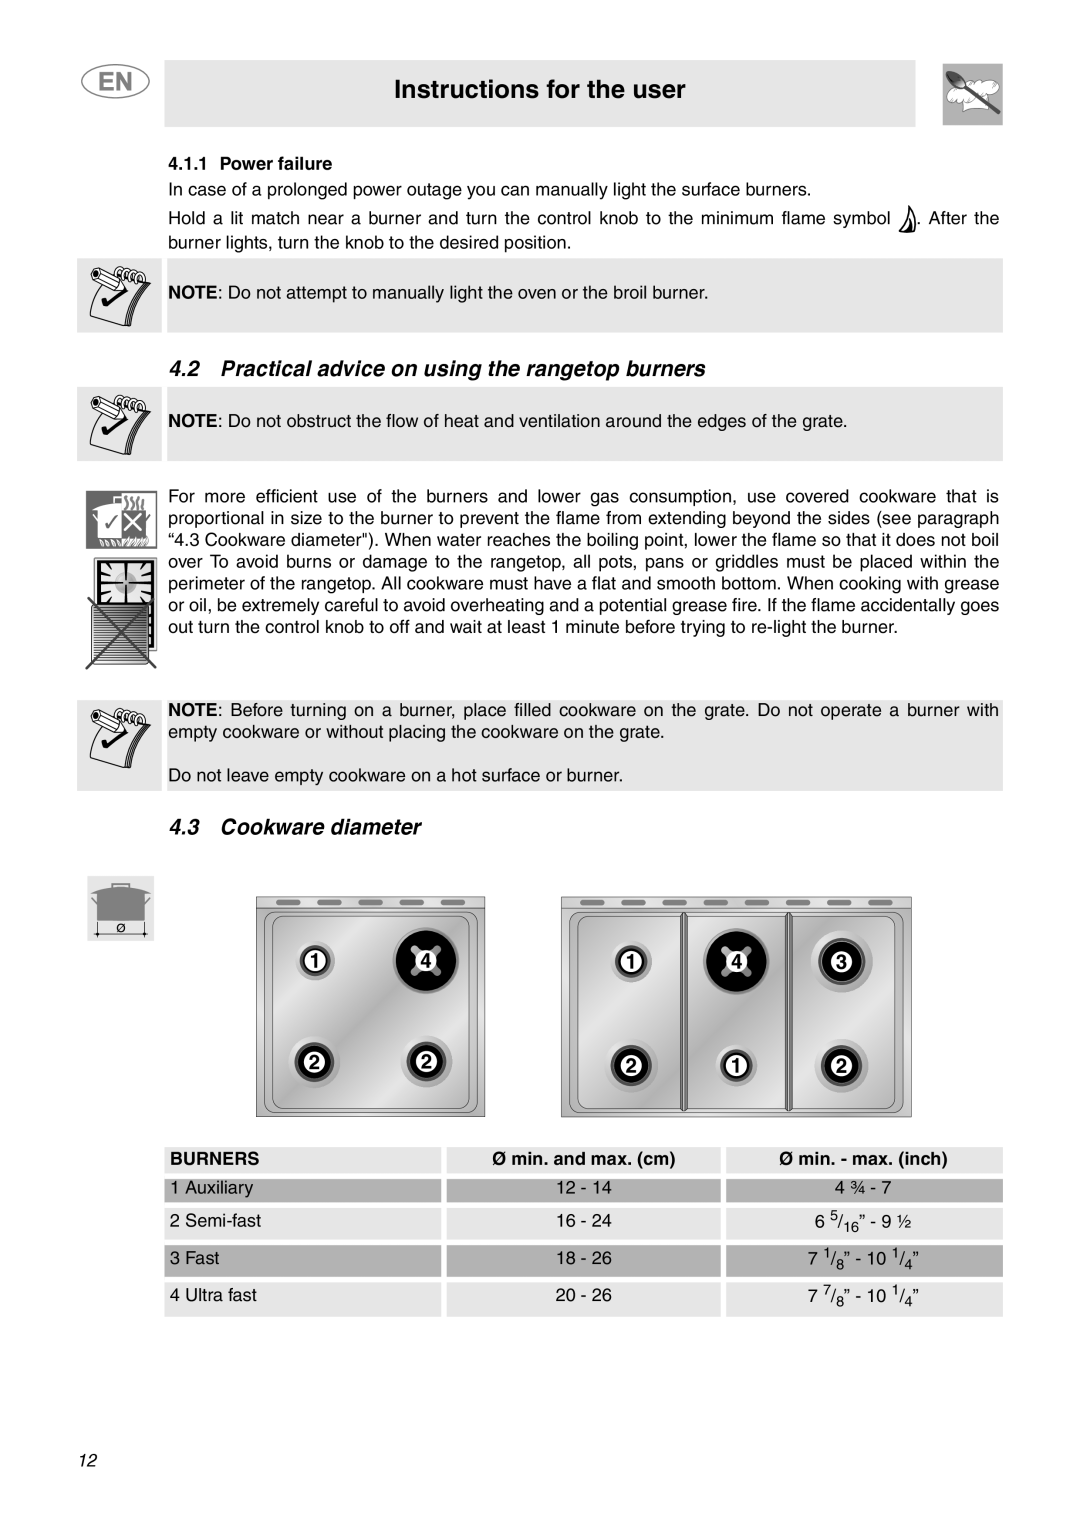 Smeg C6GGXU important safety instructions Cookware diameter, Instructions for the user, Power failure, Burners 